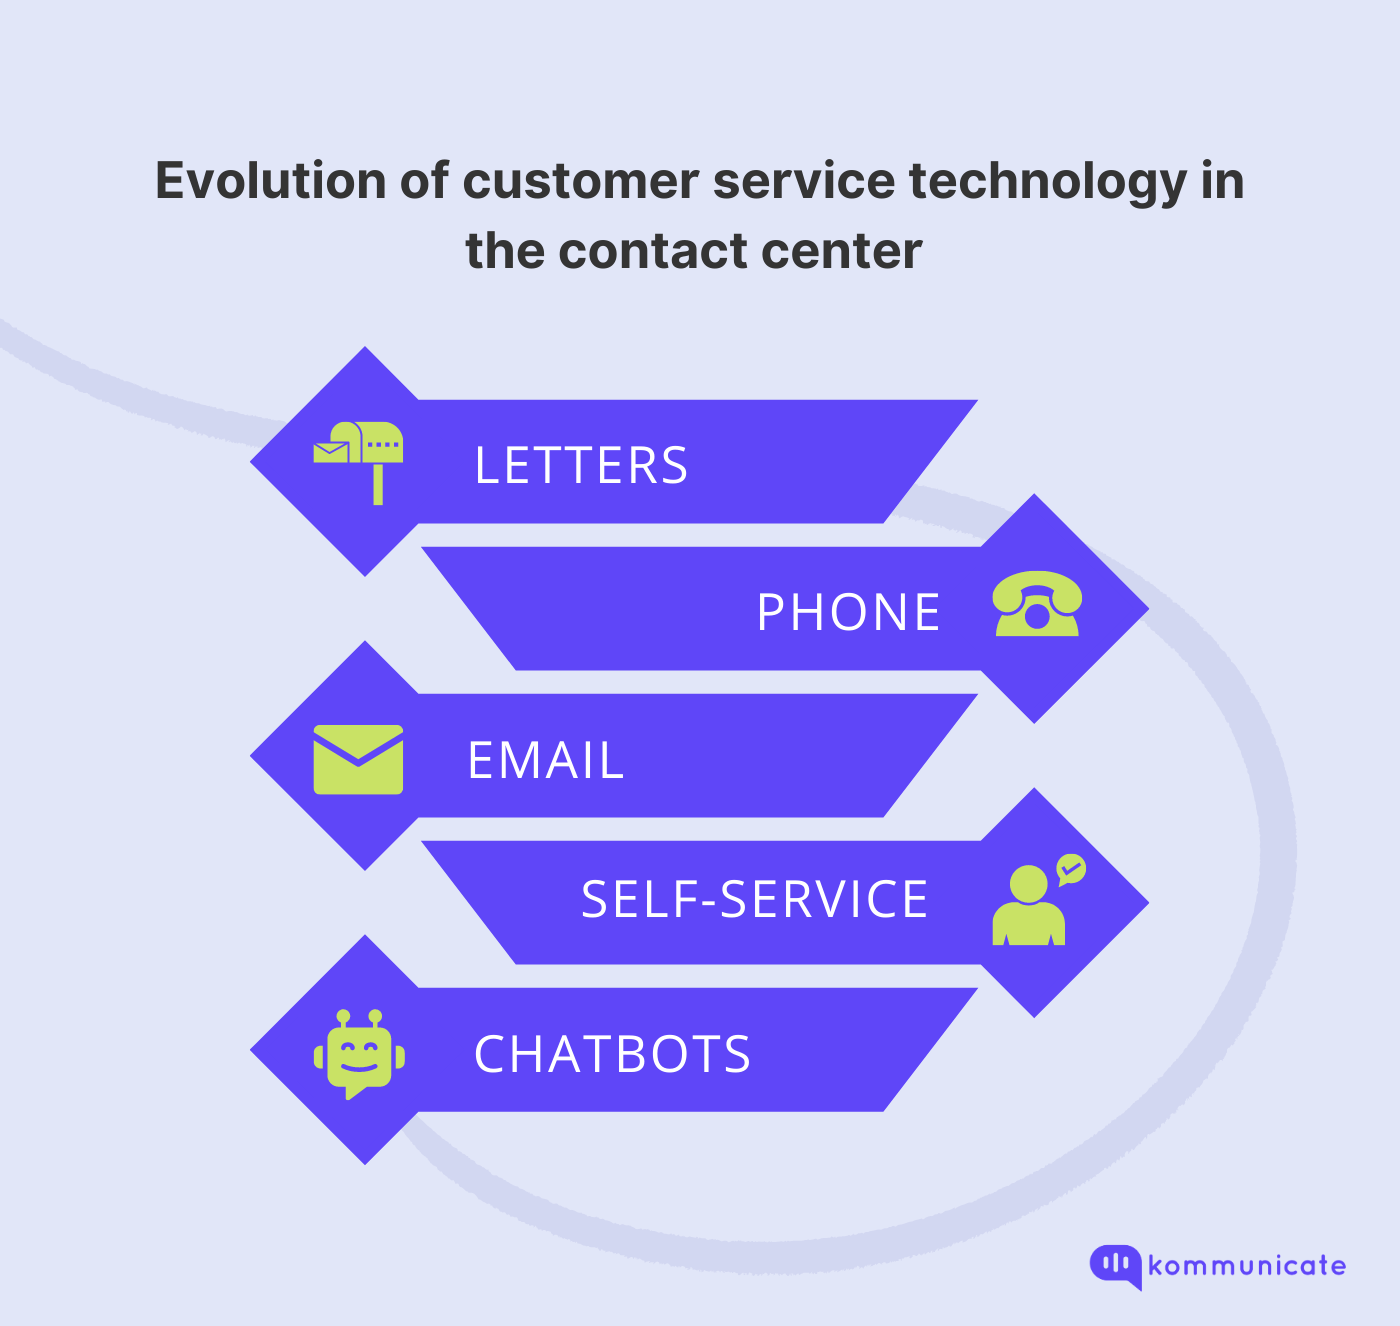 Evolution of customer service technology in contact center